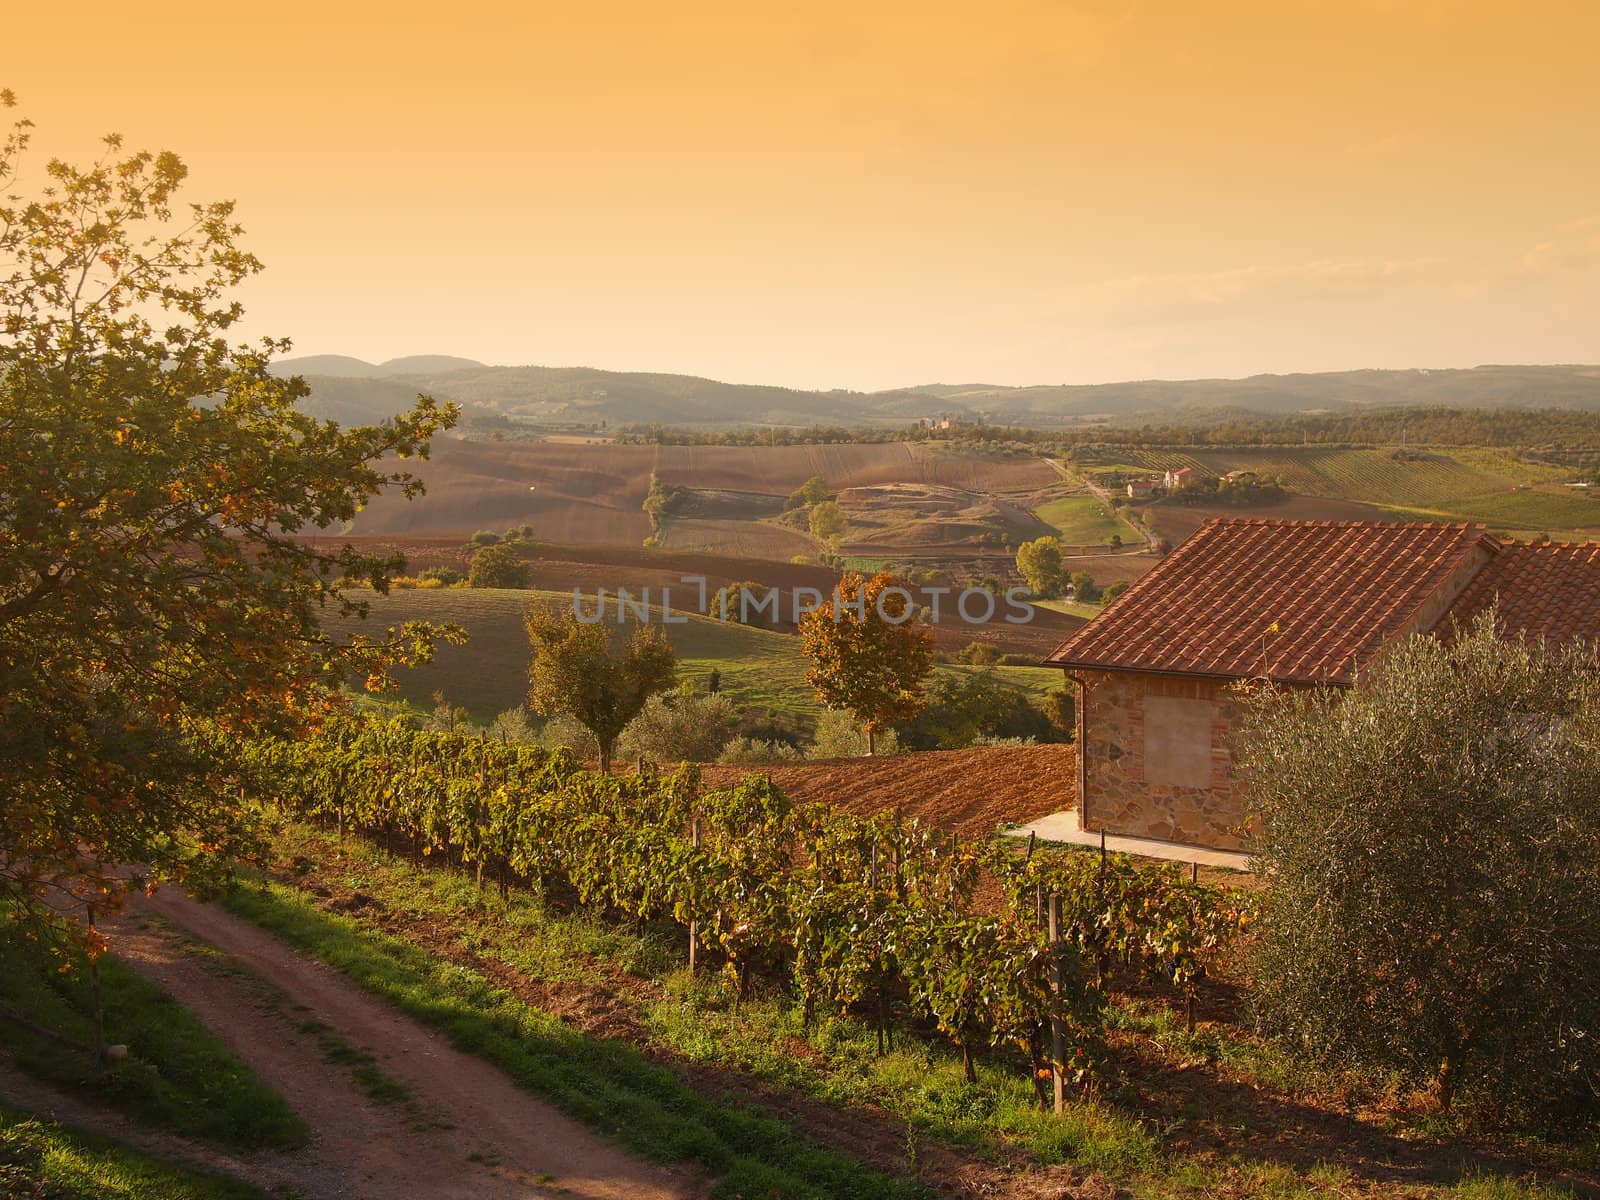 An autumn landscape with a vineyard and hills in the late fall sunlight in the Orcia Valley near Pienza in Tuscany, Italy.